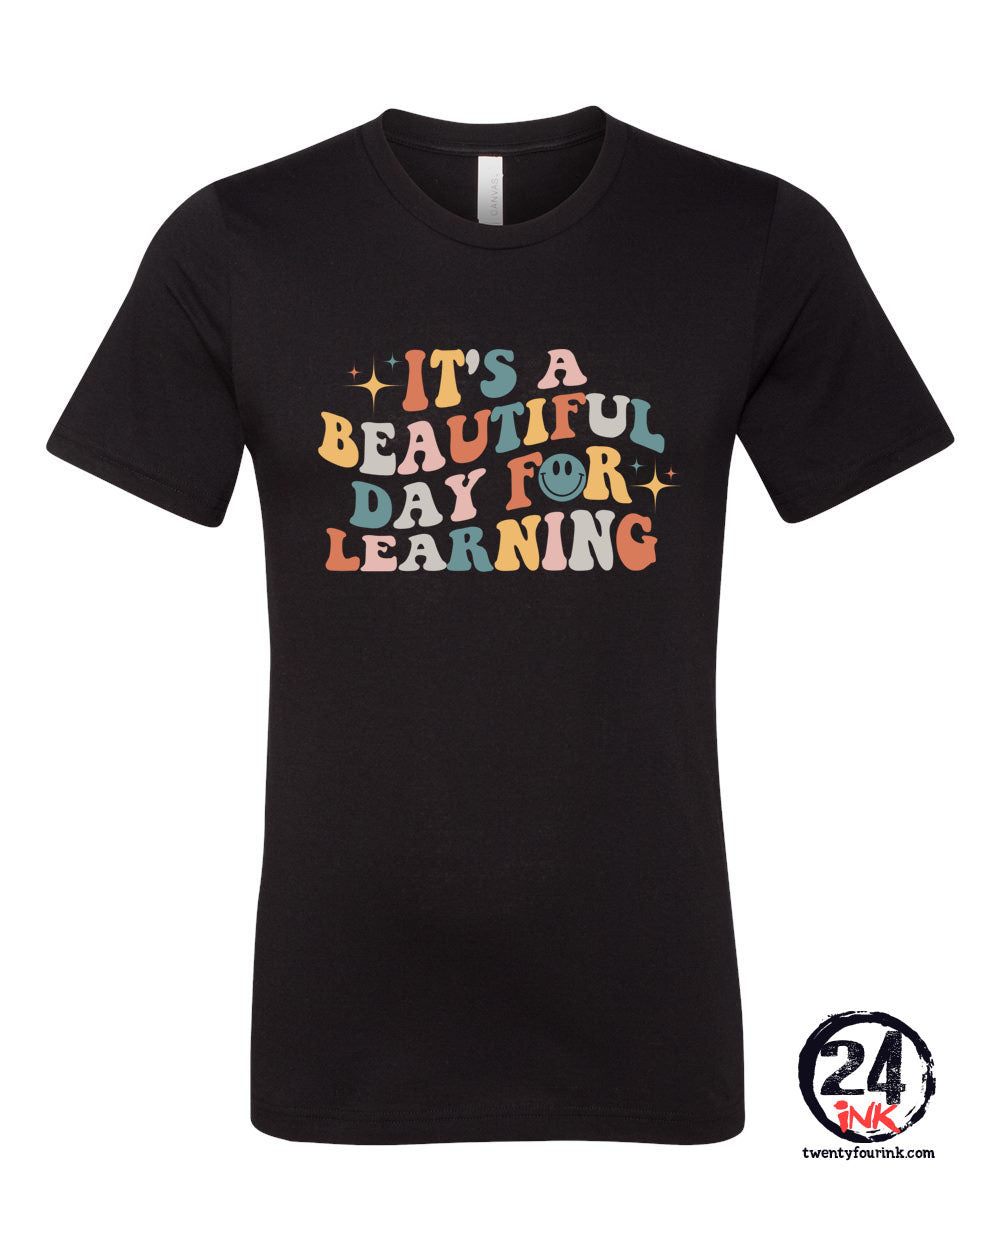 It's a beautiful day for learning T-shirt